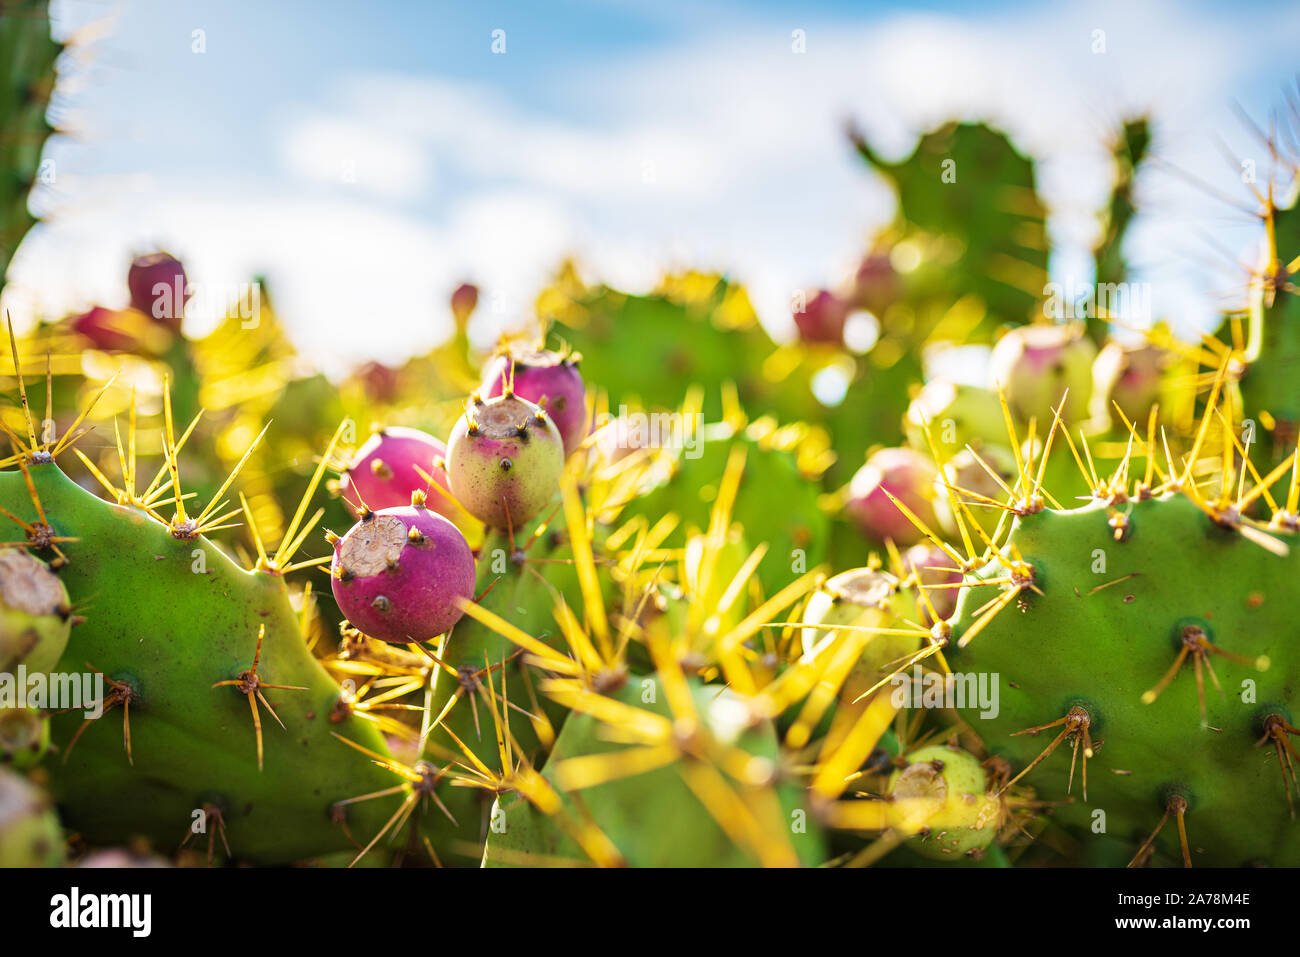 close-up of Opuntia ficus-indica, cactus pear or prickly pear, with red fruits against blue sky Stock Photo